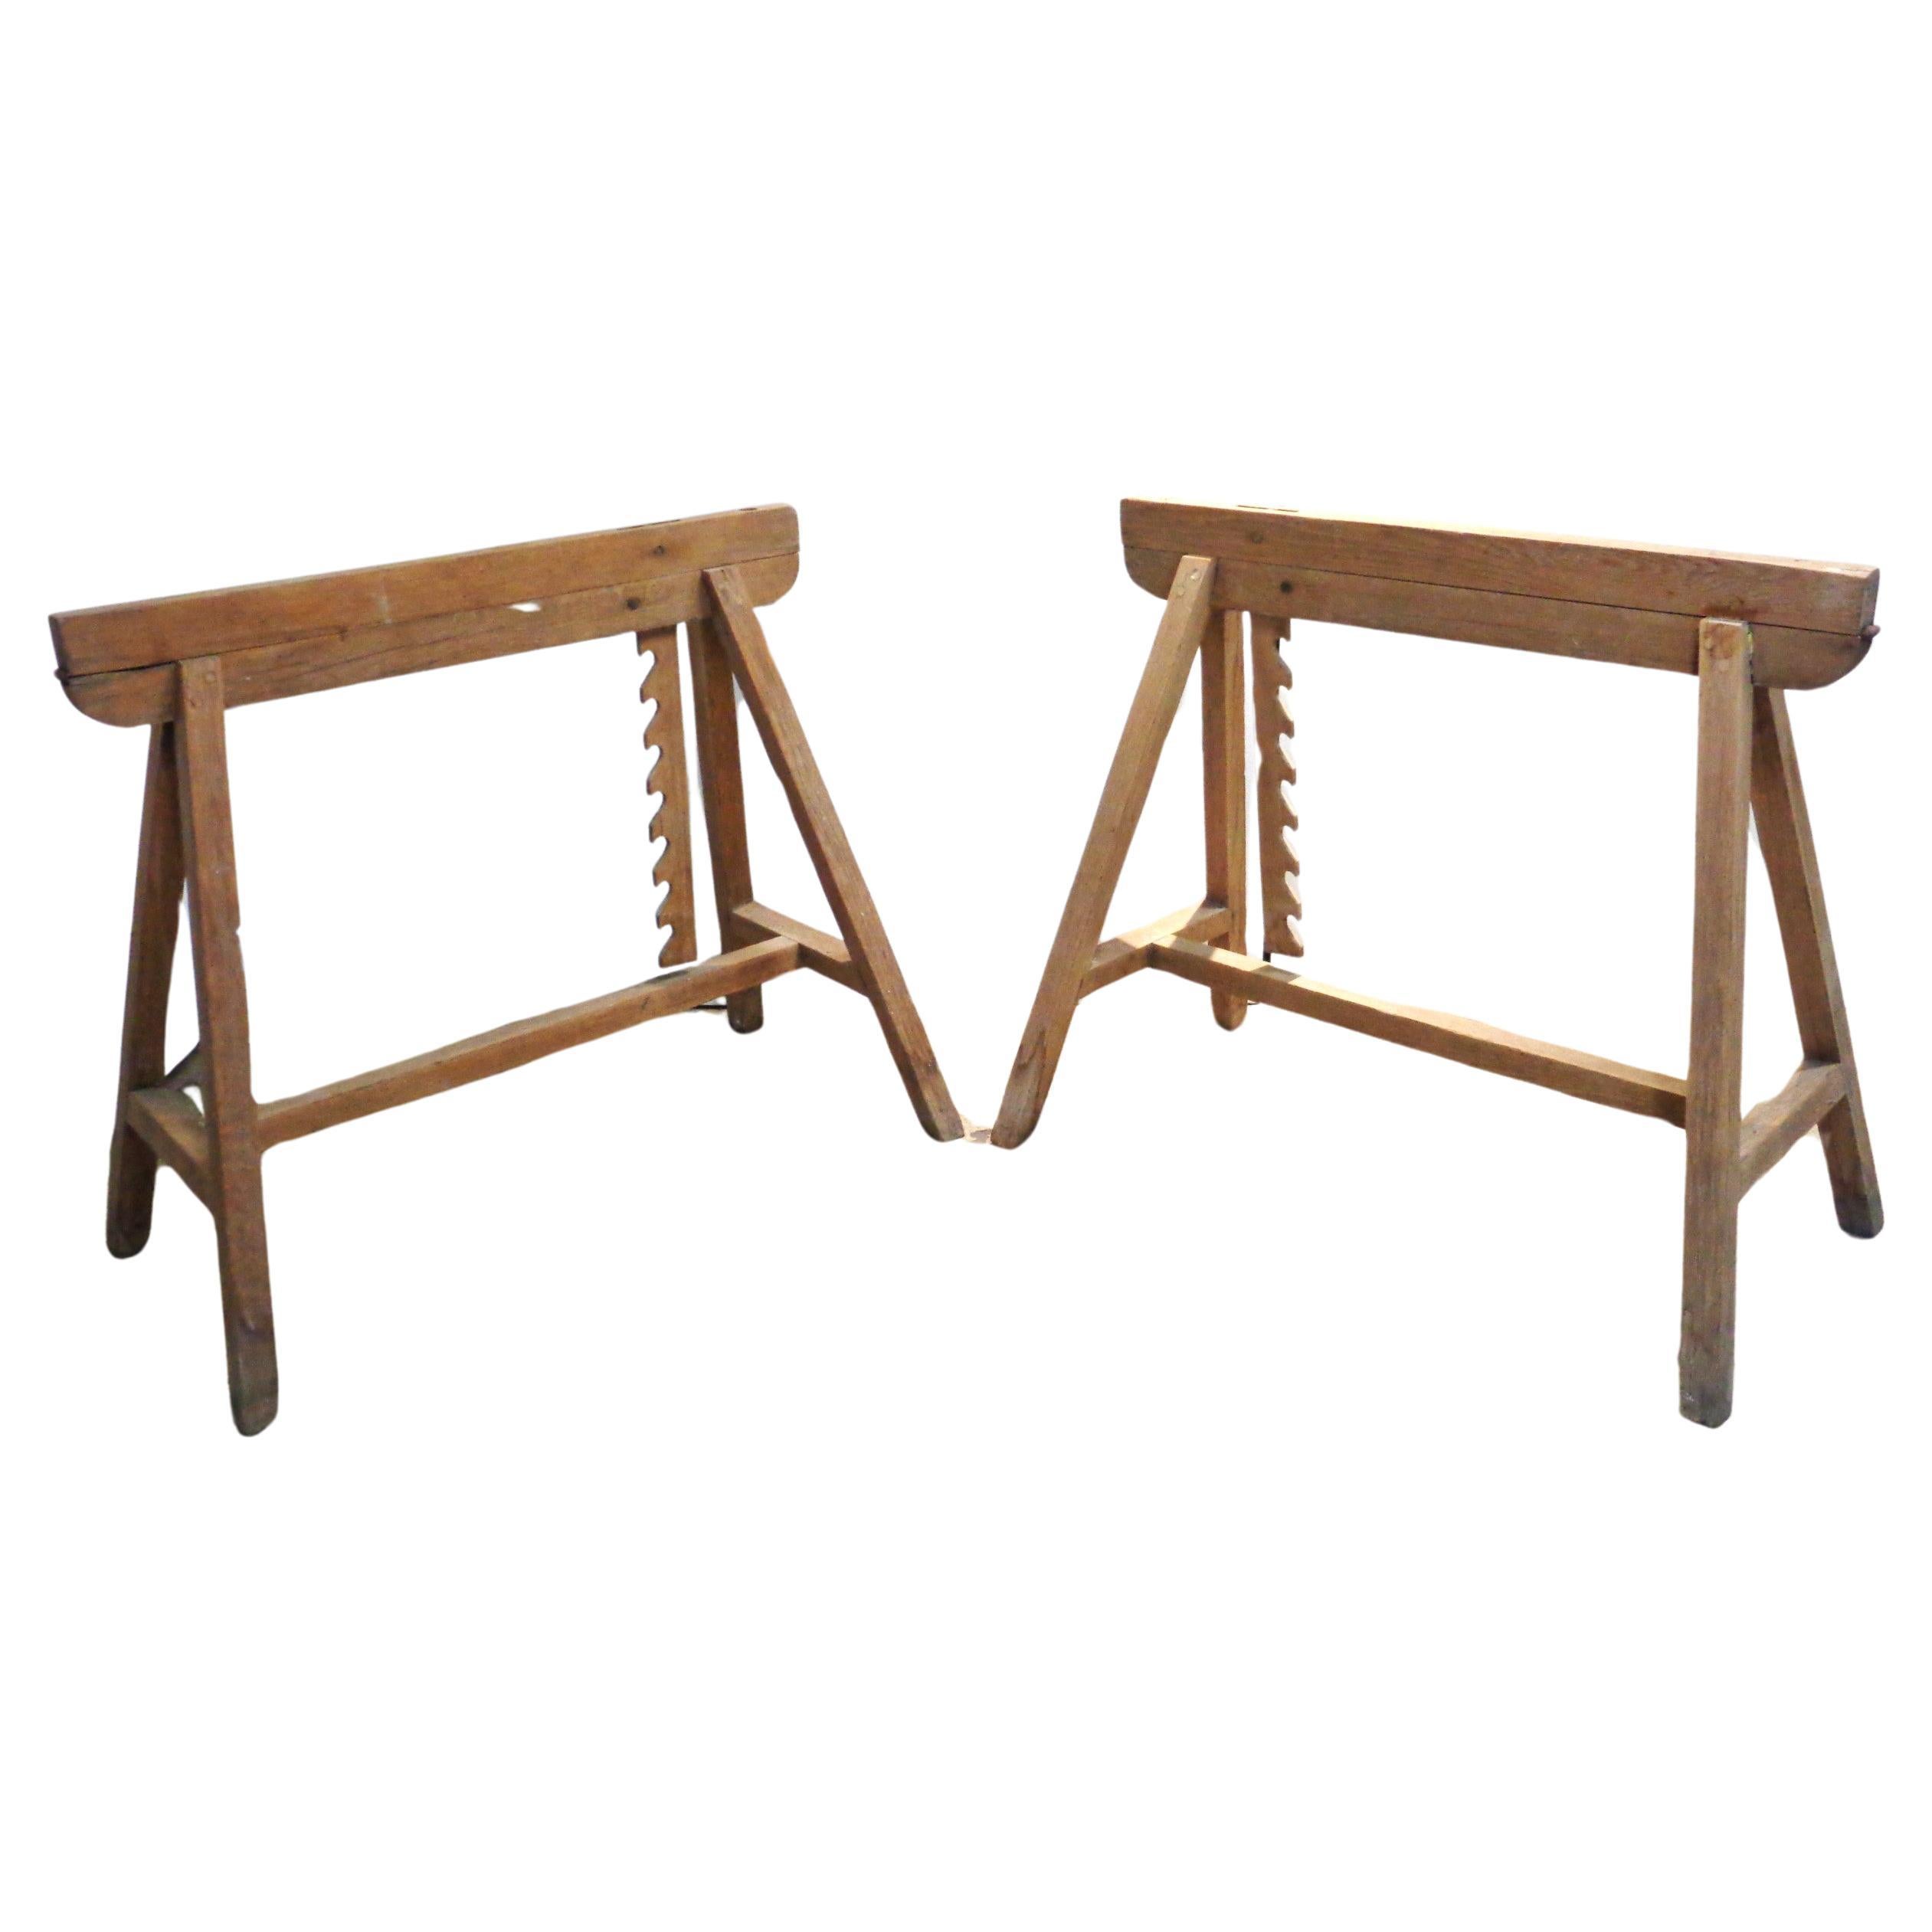 A rare pair of antique adjustable oak draftsman sawhorses with early pegged joinery construction / top boards with metal hinges / sawtooth wood planks which lock into dowels on framework to raise or lower the angle ( 7 different positions )